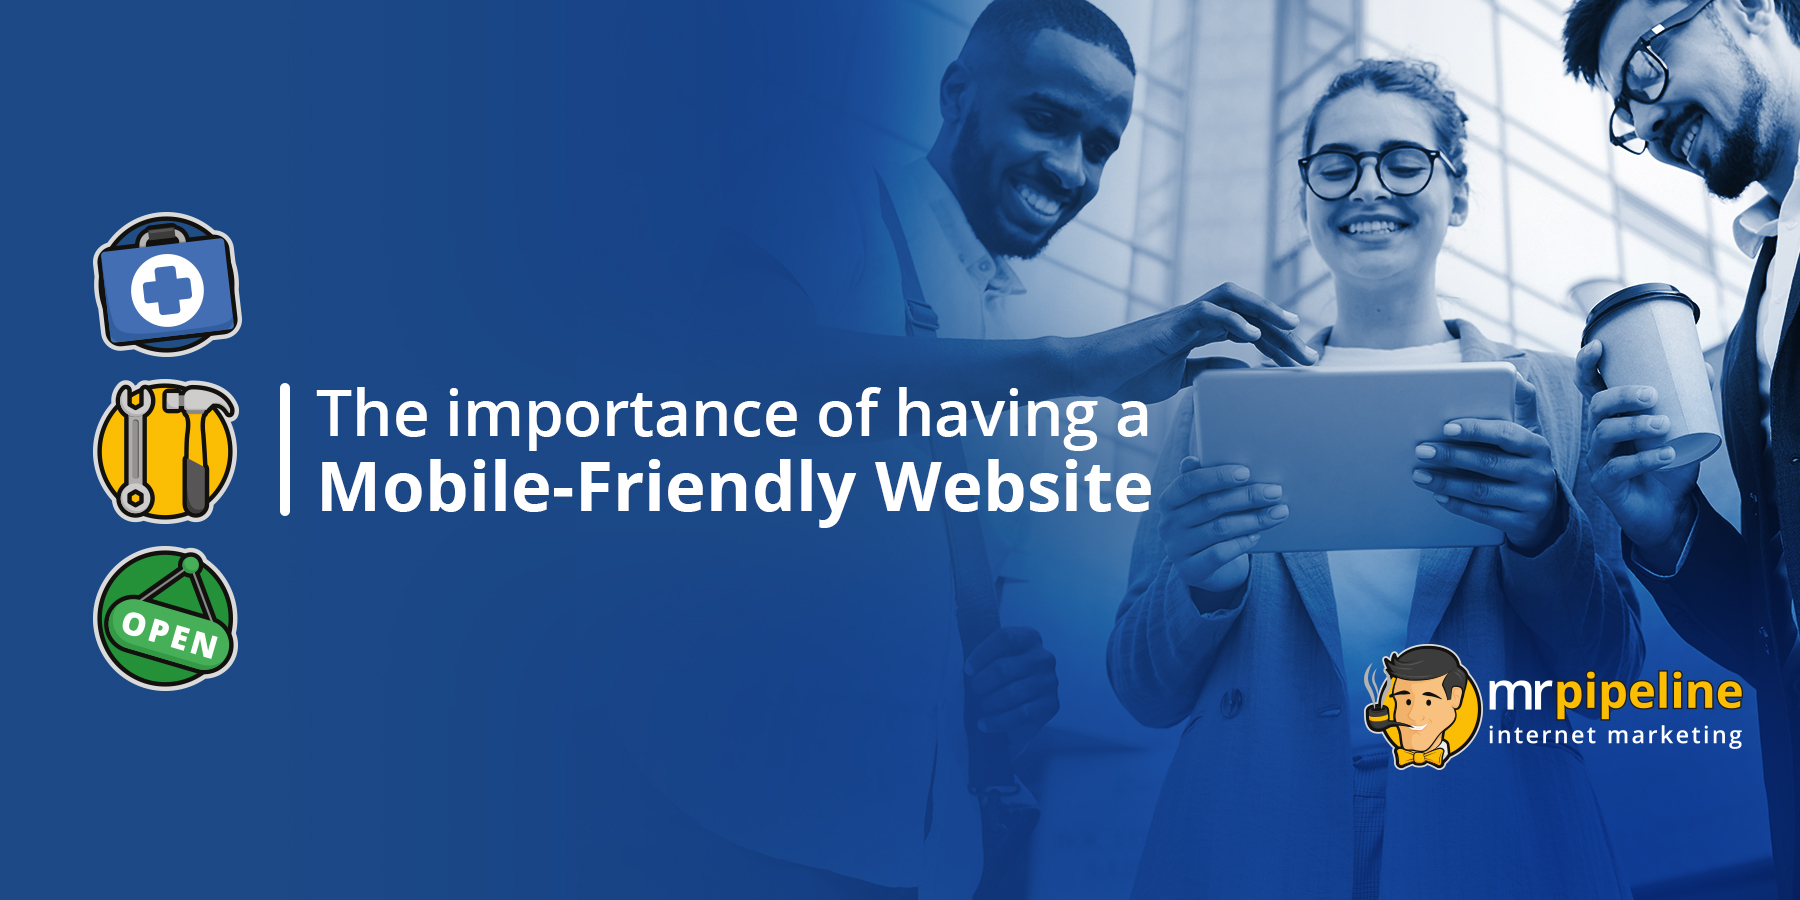 The importance of having a mobile-friendly website